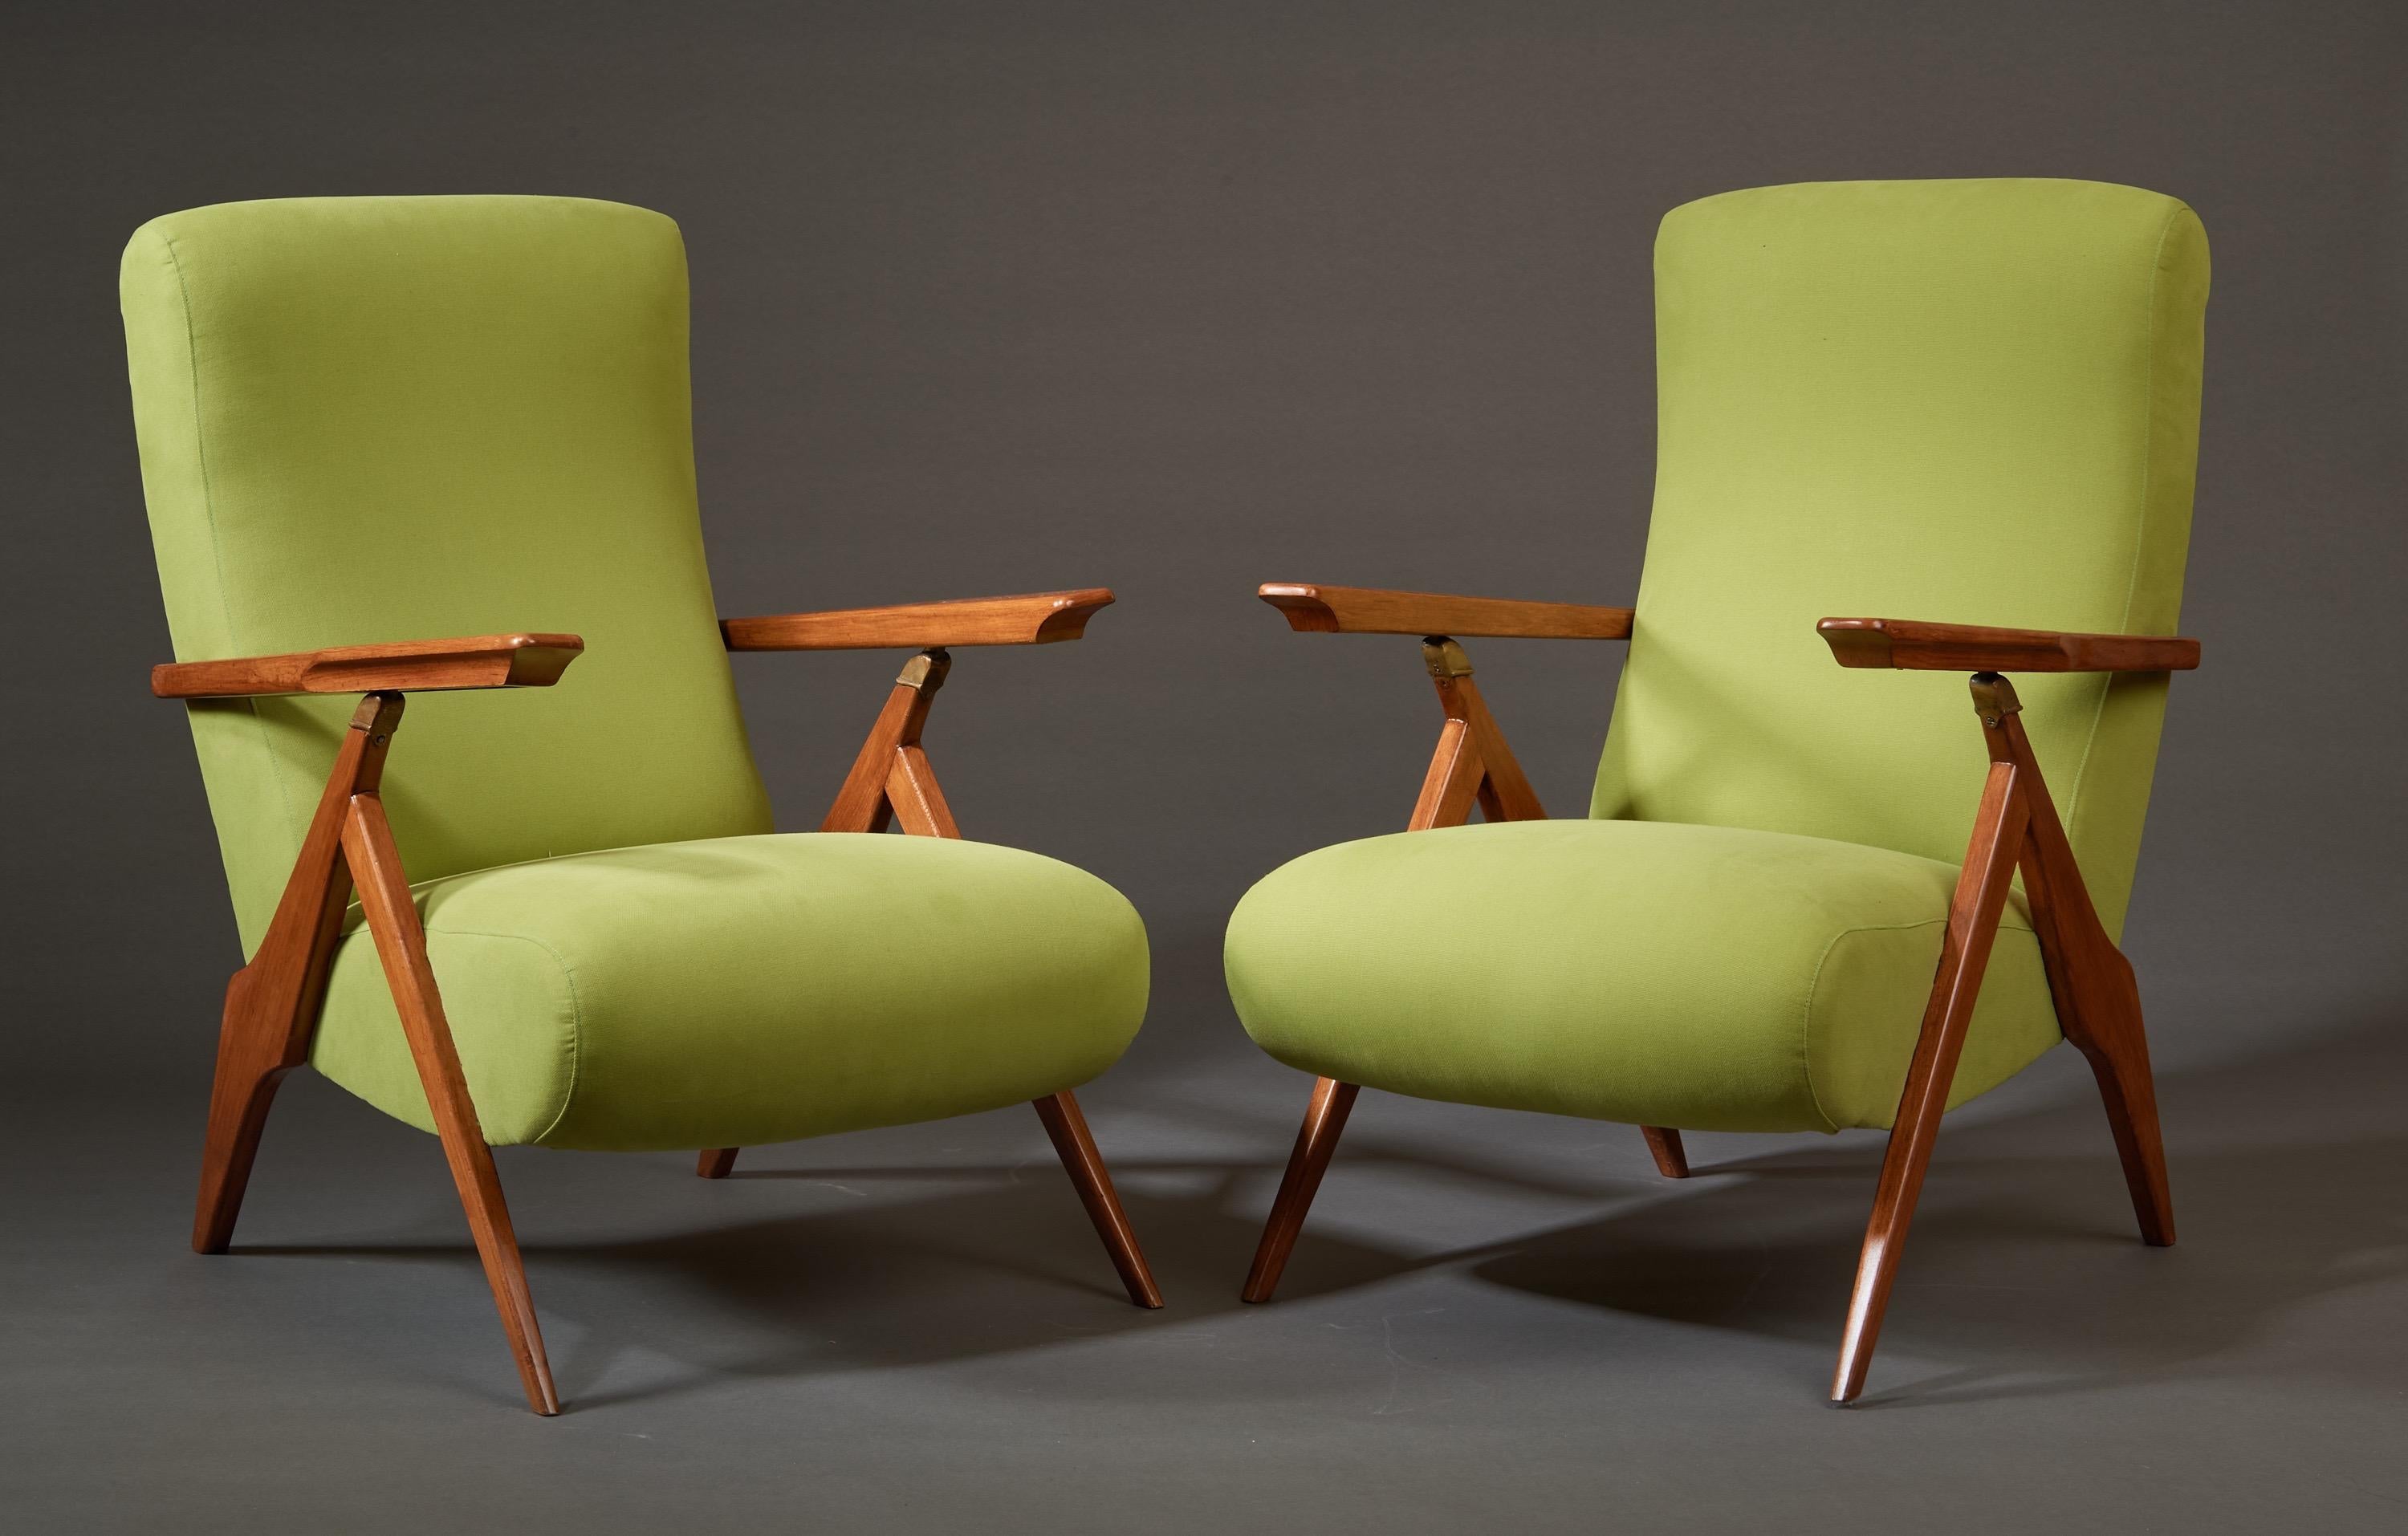 Elegant Pair of Reclining Green Armchairs in Fruitwood and Brass, Italy 1950s For Sale 11